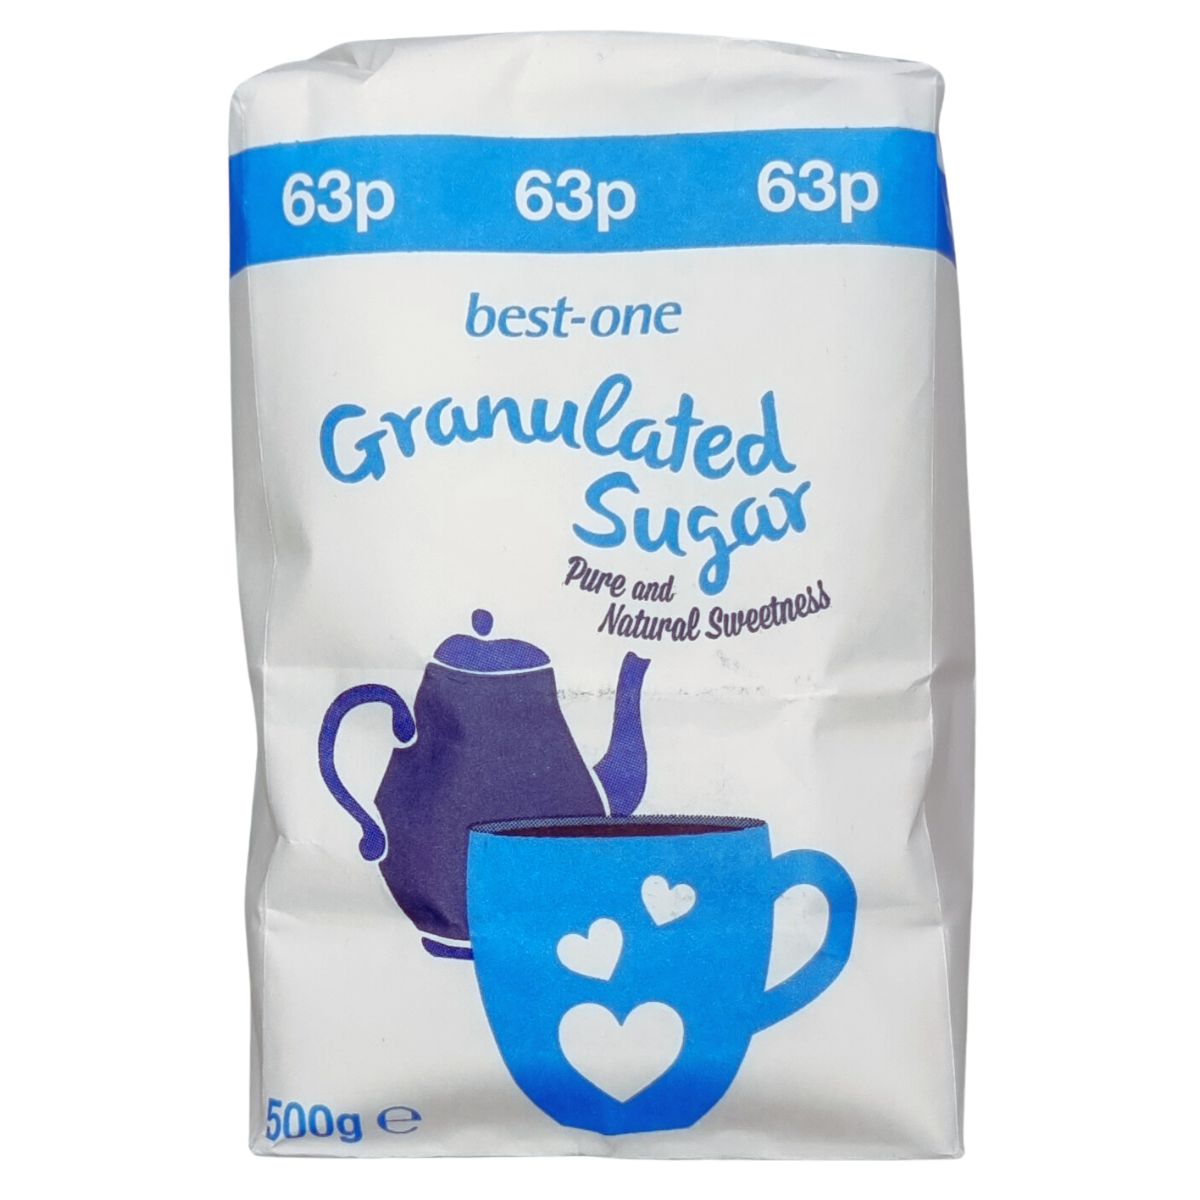 Best-One - Granulated Sugar - 500g - Continental Food Store